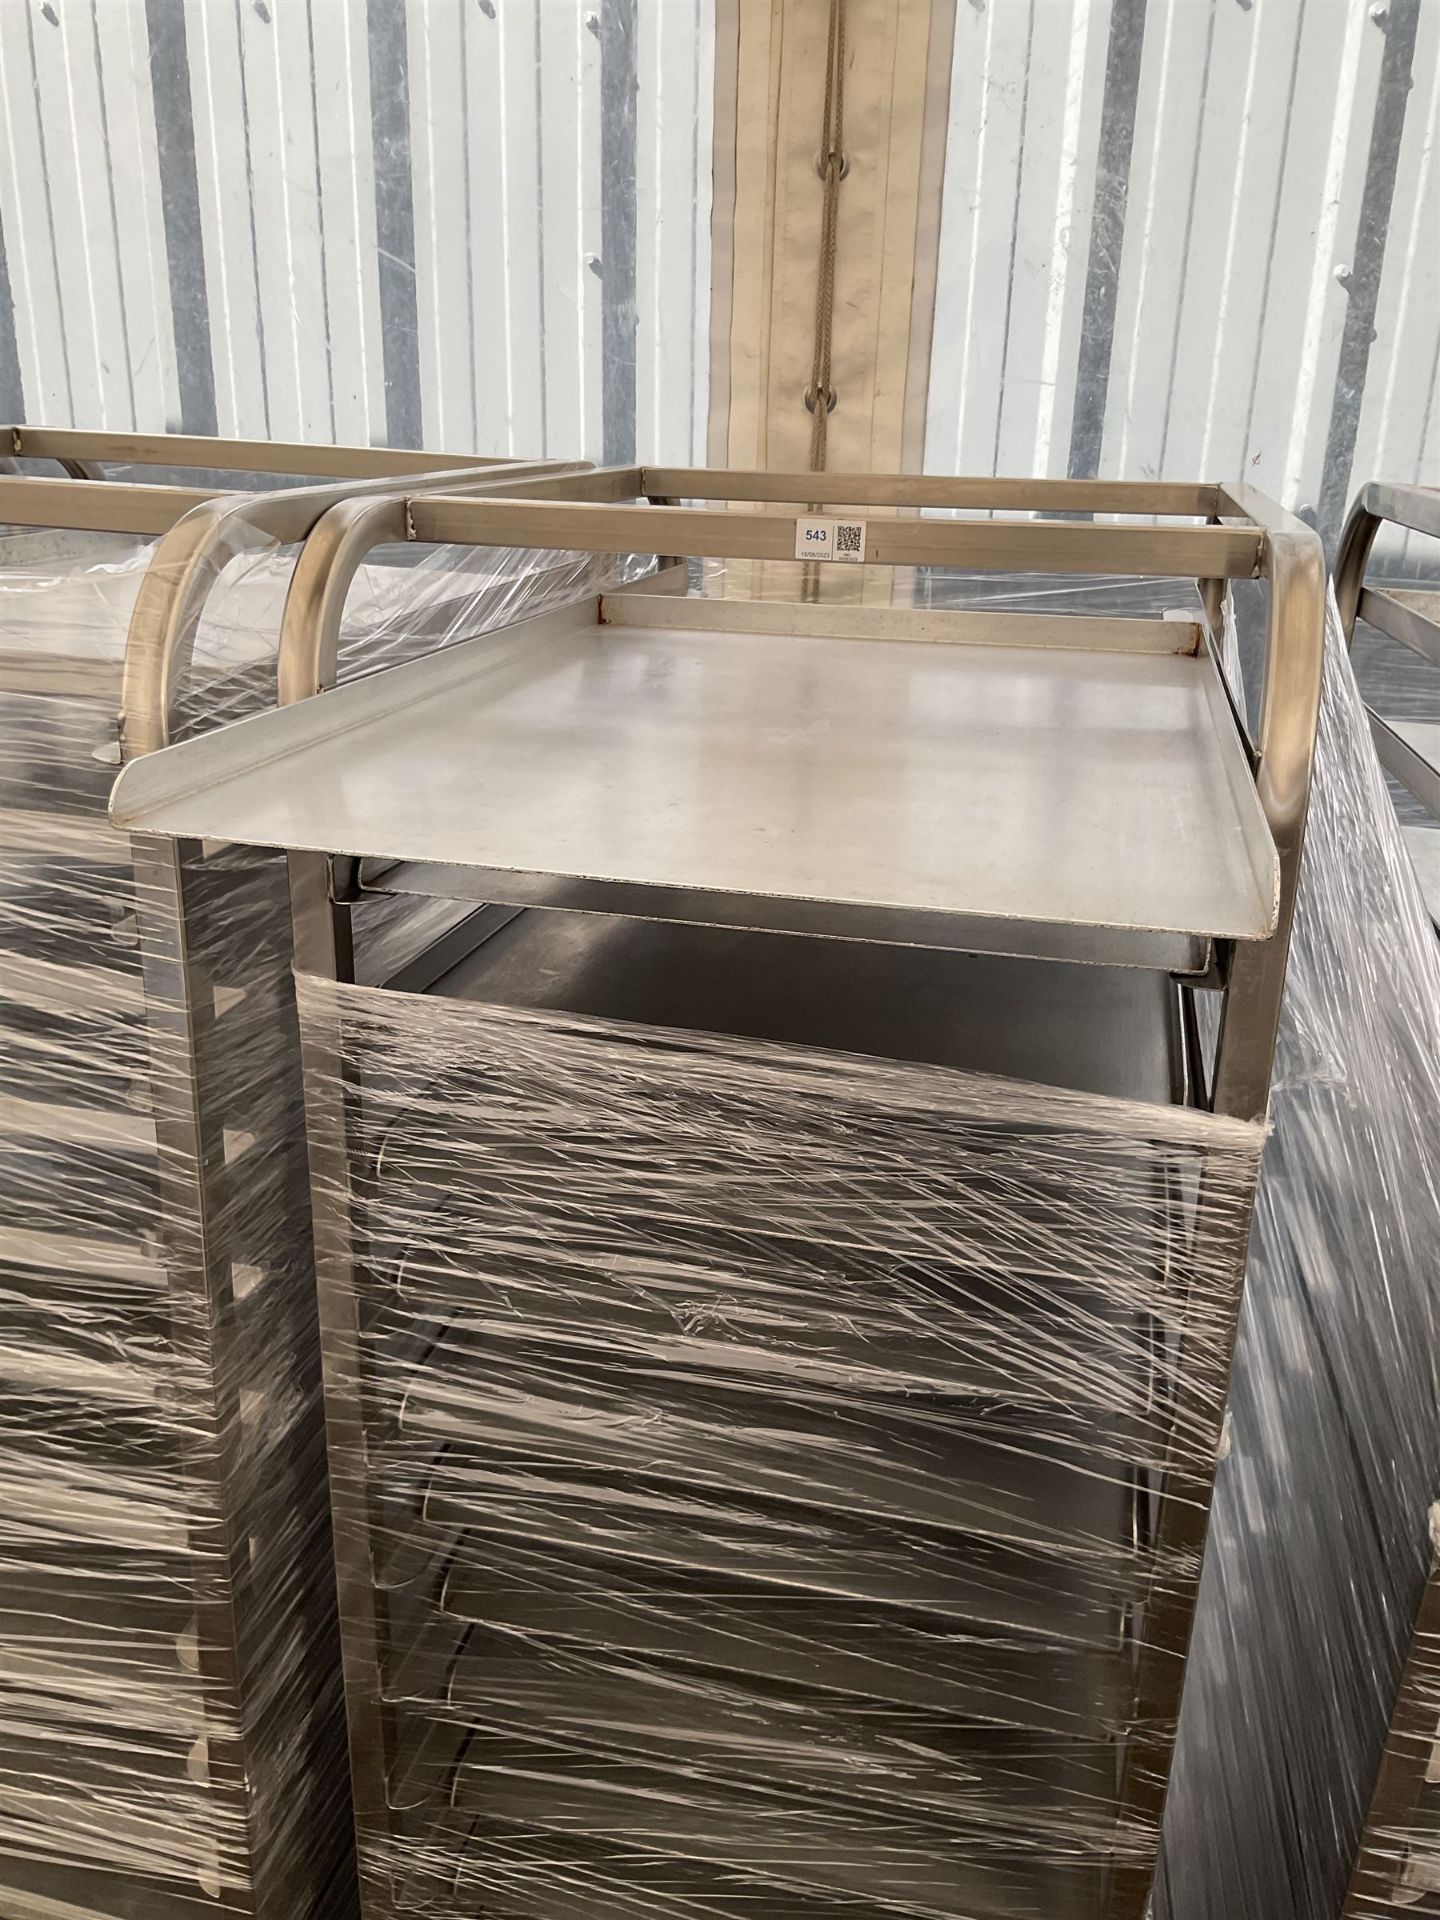 Stainless steel commercial tray rack trolley - Image 2 of 3